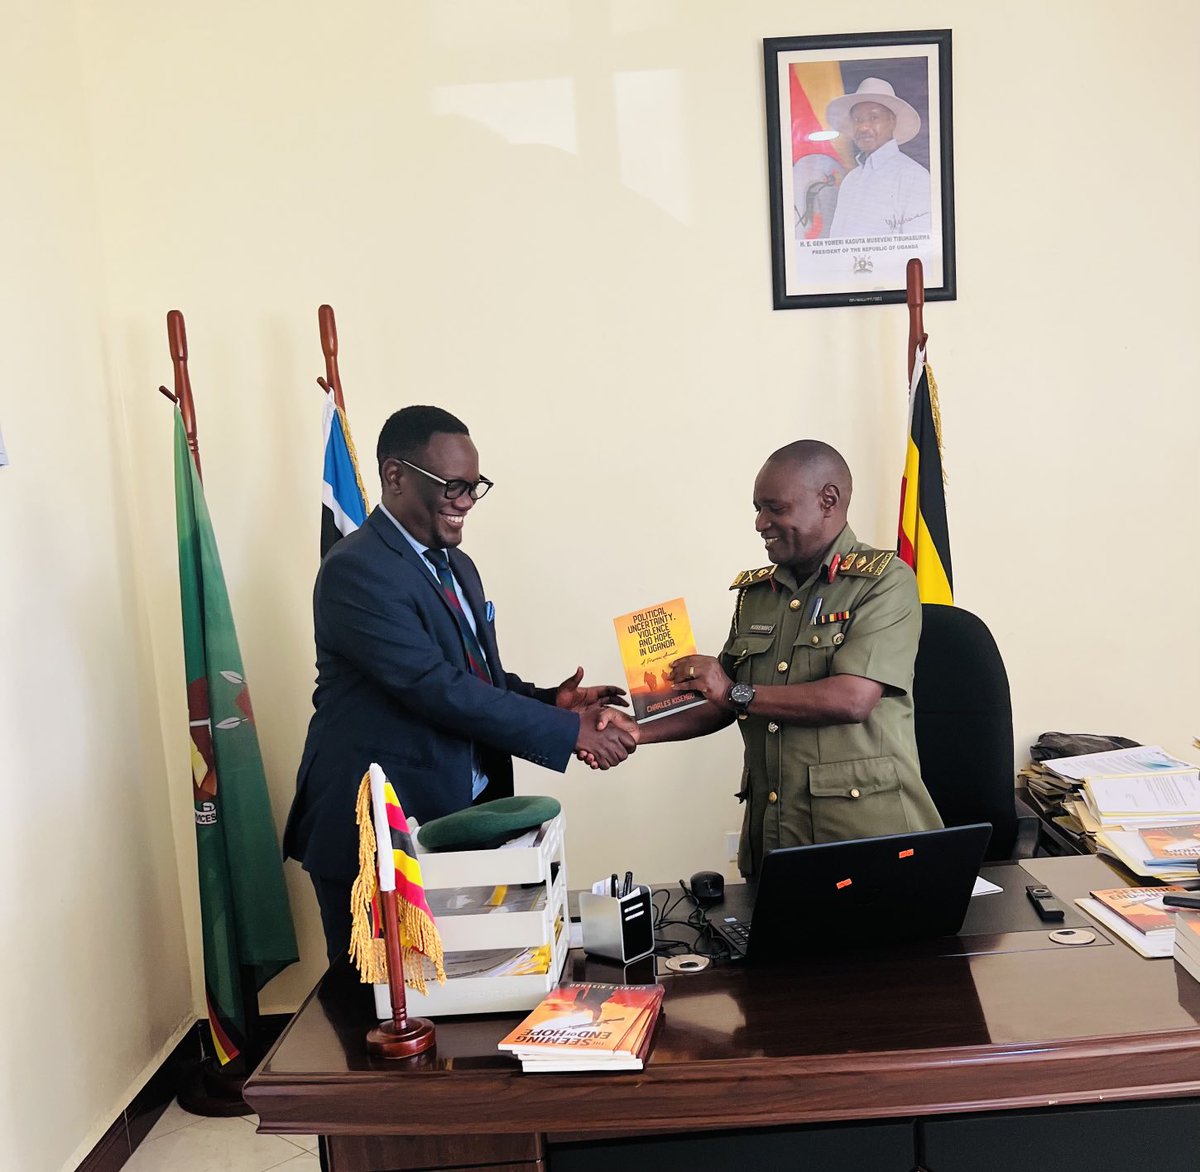 Glad to receive an autographed copy of “Political uncertainty, violence and hope in Uganda” from Gen Charles Kisembo, Director of the National Leadership Institute(NALI), Kyankwanzi. It is a scholarly analysis of Uganda’s politics from a distinguished military leader.